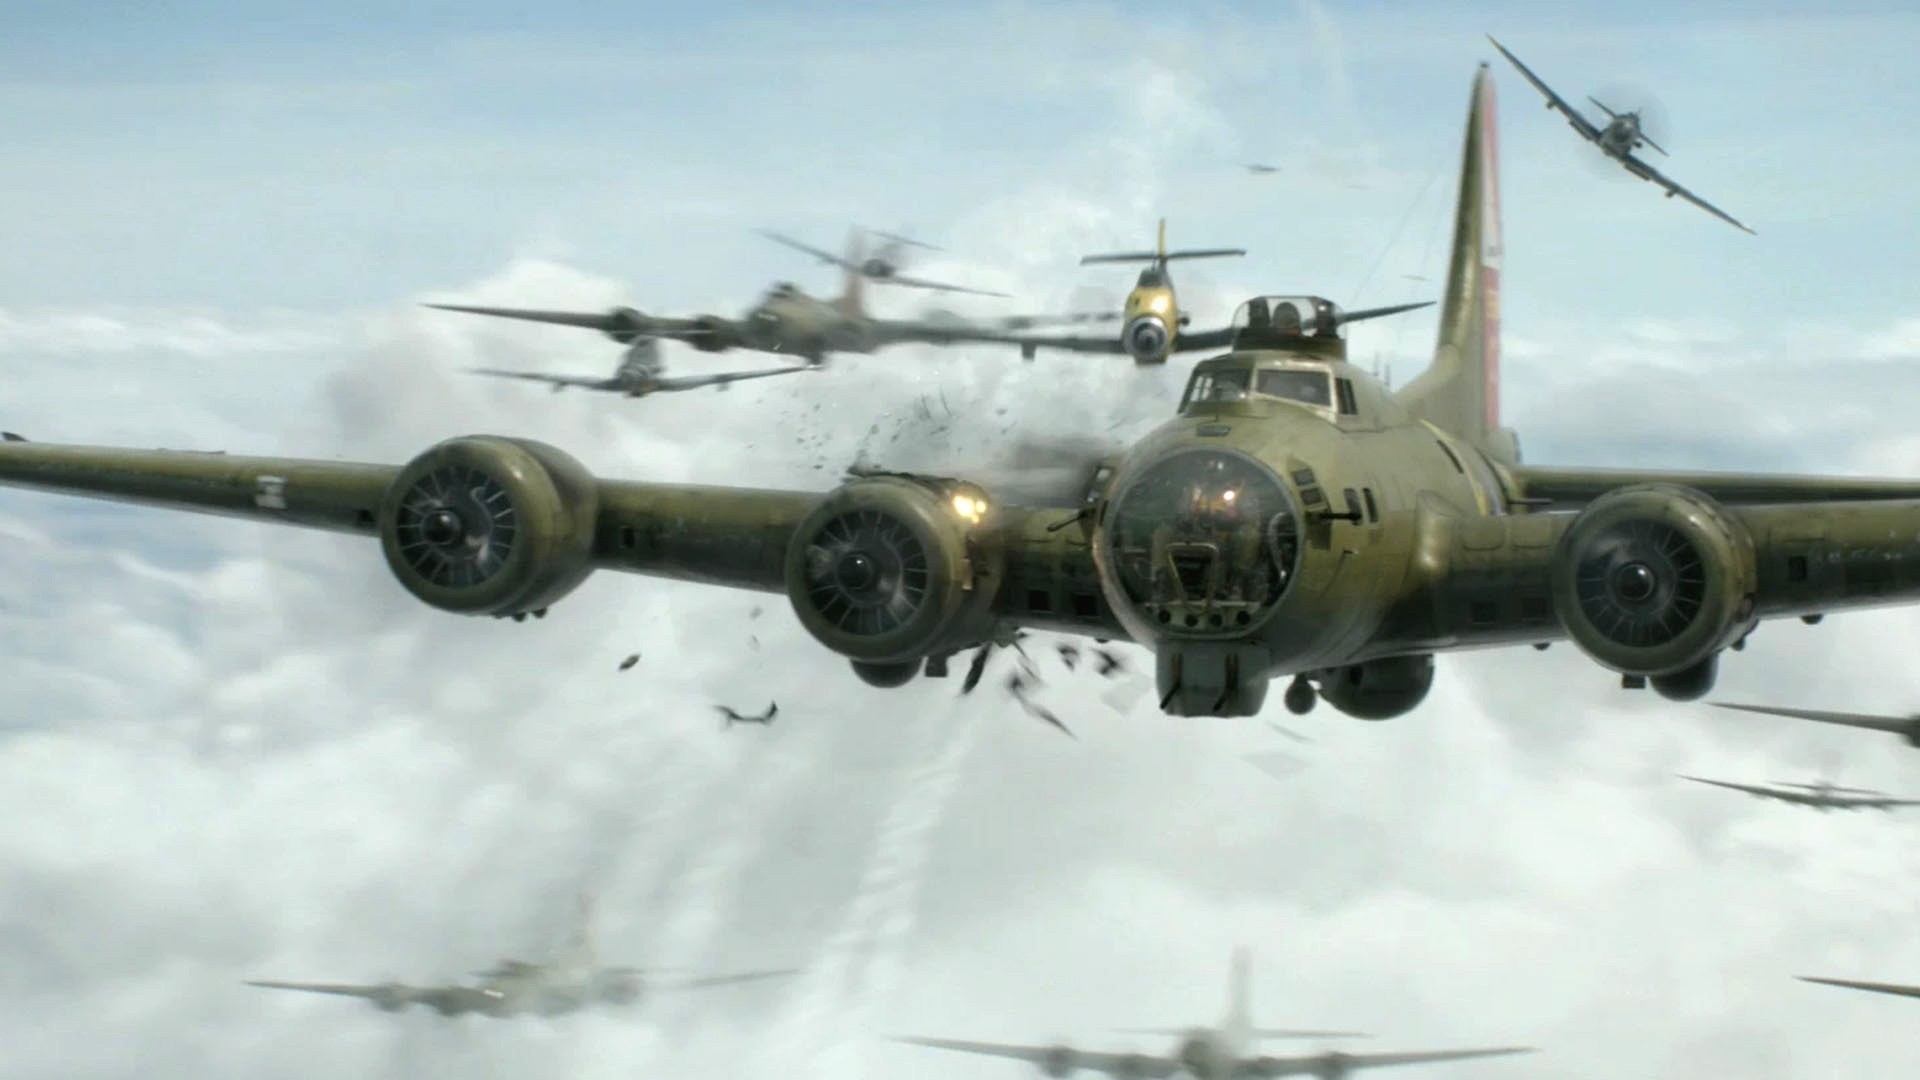 General 1920x1080 airplane World War II Boeing B-17 Flying Fortress star engine dogfight movies military aircraft Bomber Messerschmitt Bf 109 vehicle aircraft Boeing Messerschmitt American aircraft German aircraft